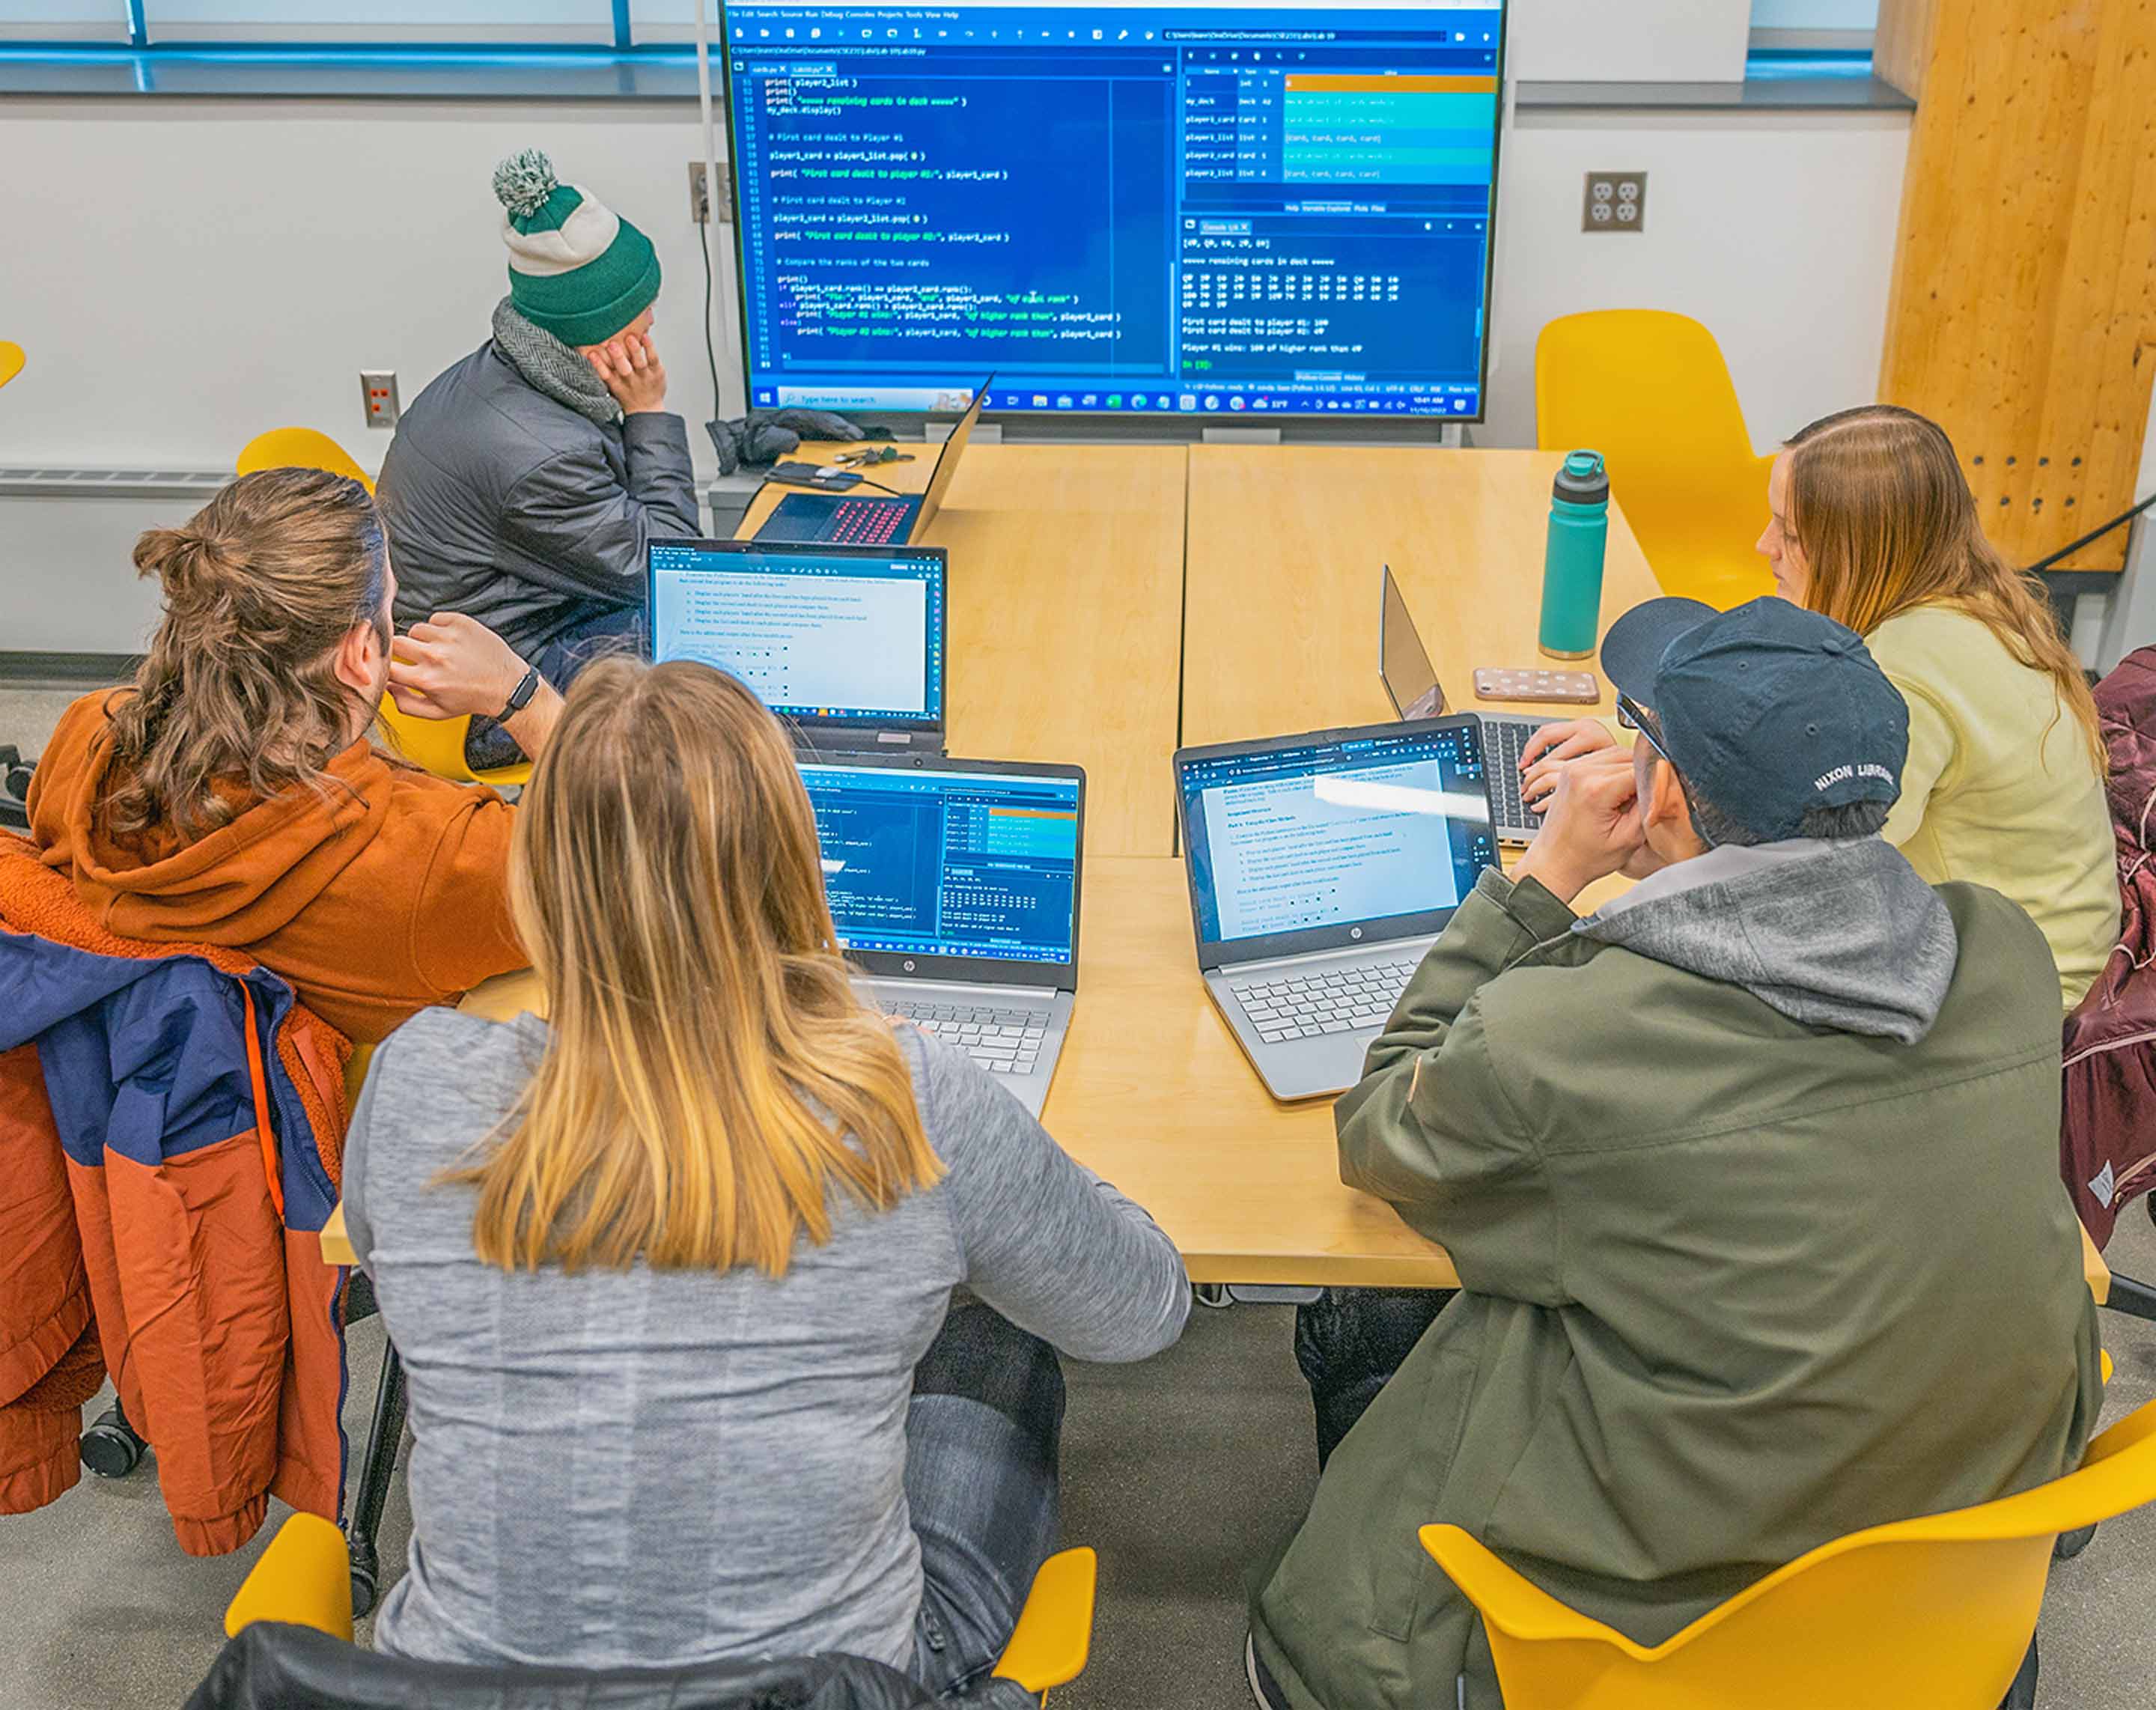 Students sitting at a table with laptops review  code on a large monitor during an introduction to programming class.